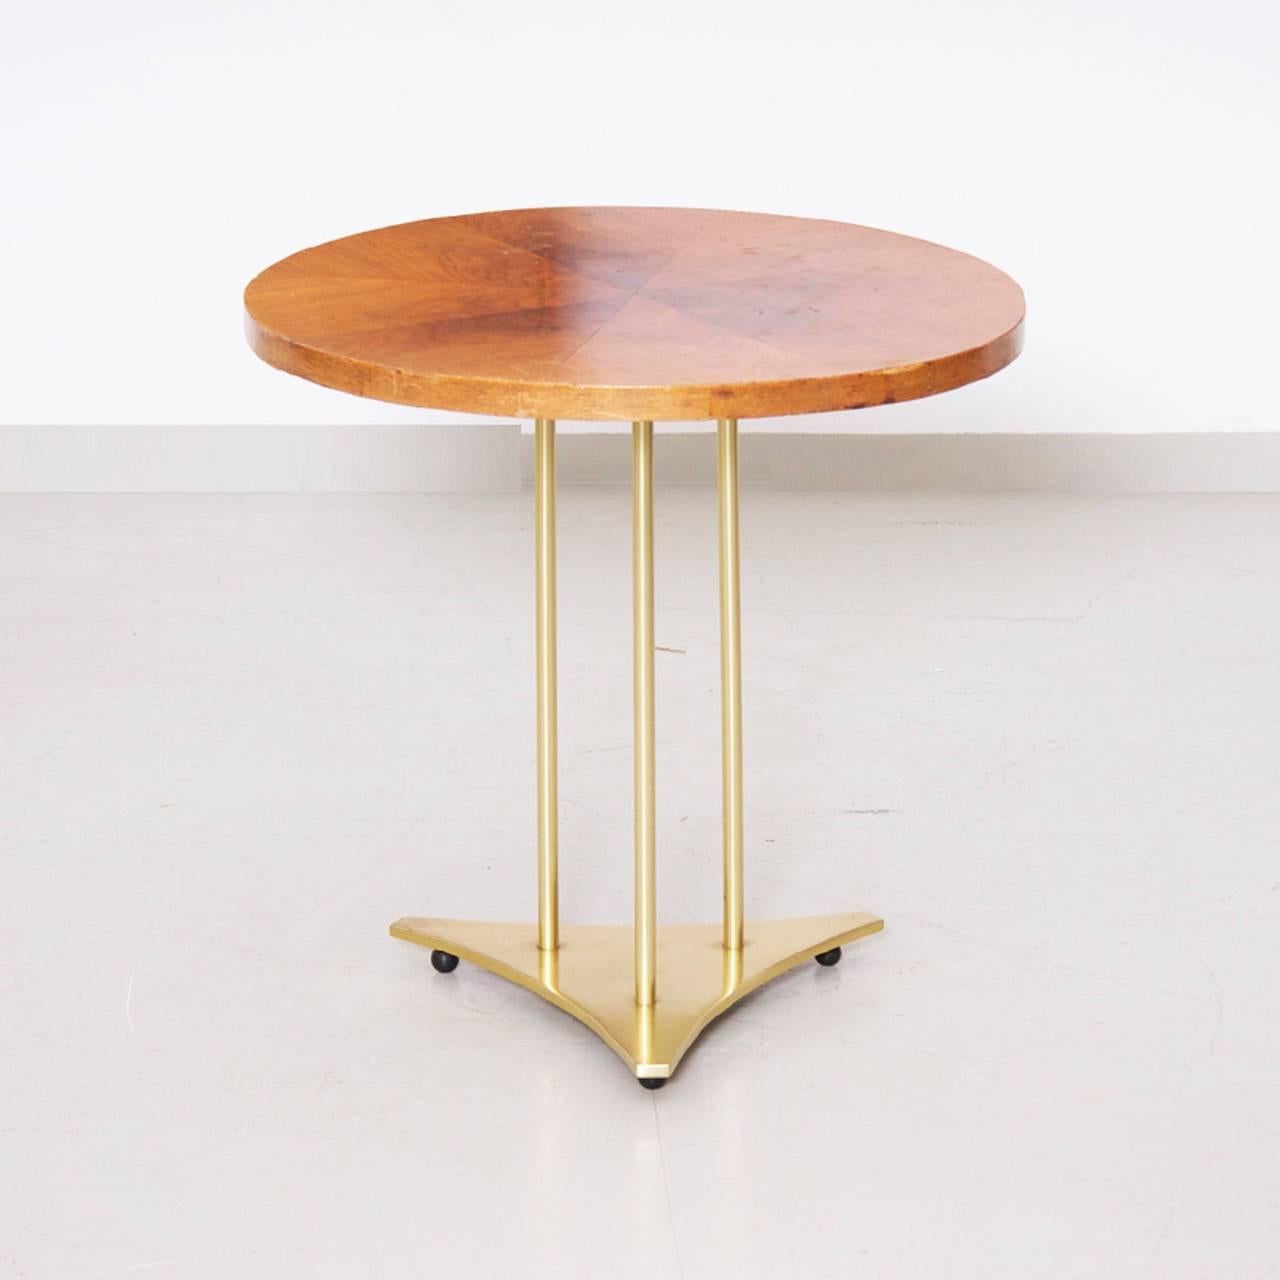 Erwin Lambeth coffee table with solid brass base and wooden top that is cut in eight parts.